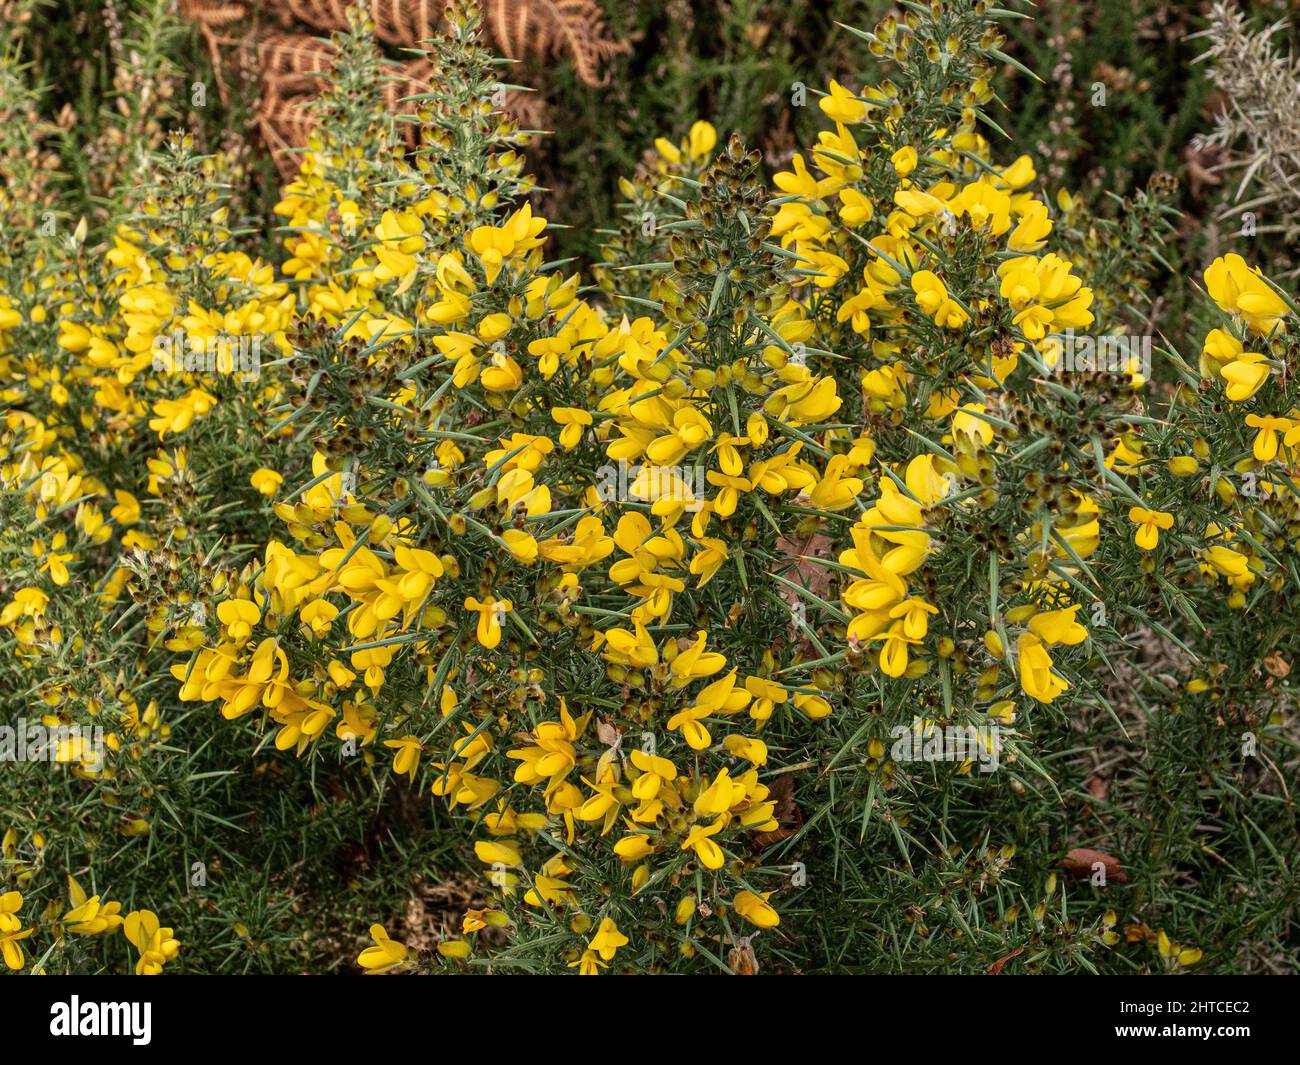 A close up of part of a young yellow flowering gorse bush Ulex europaeus growing on heathland. Stock Photo